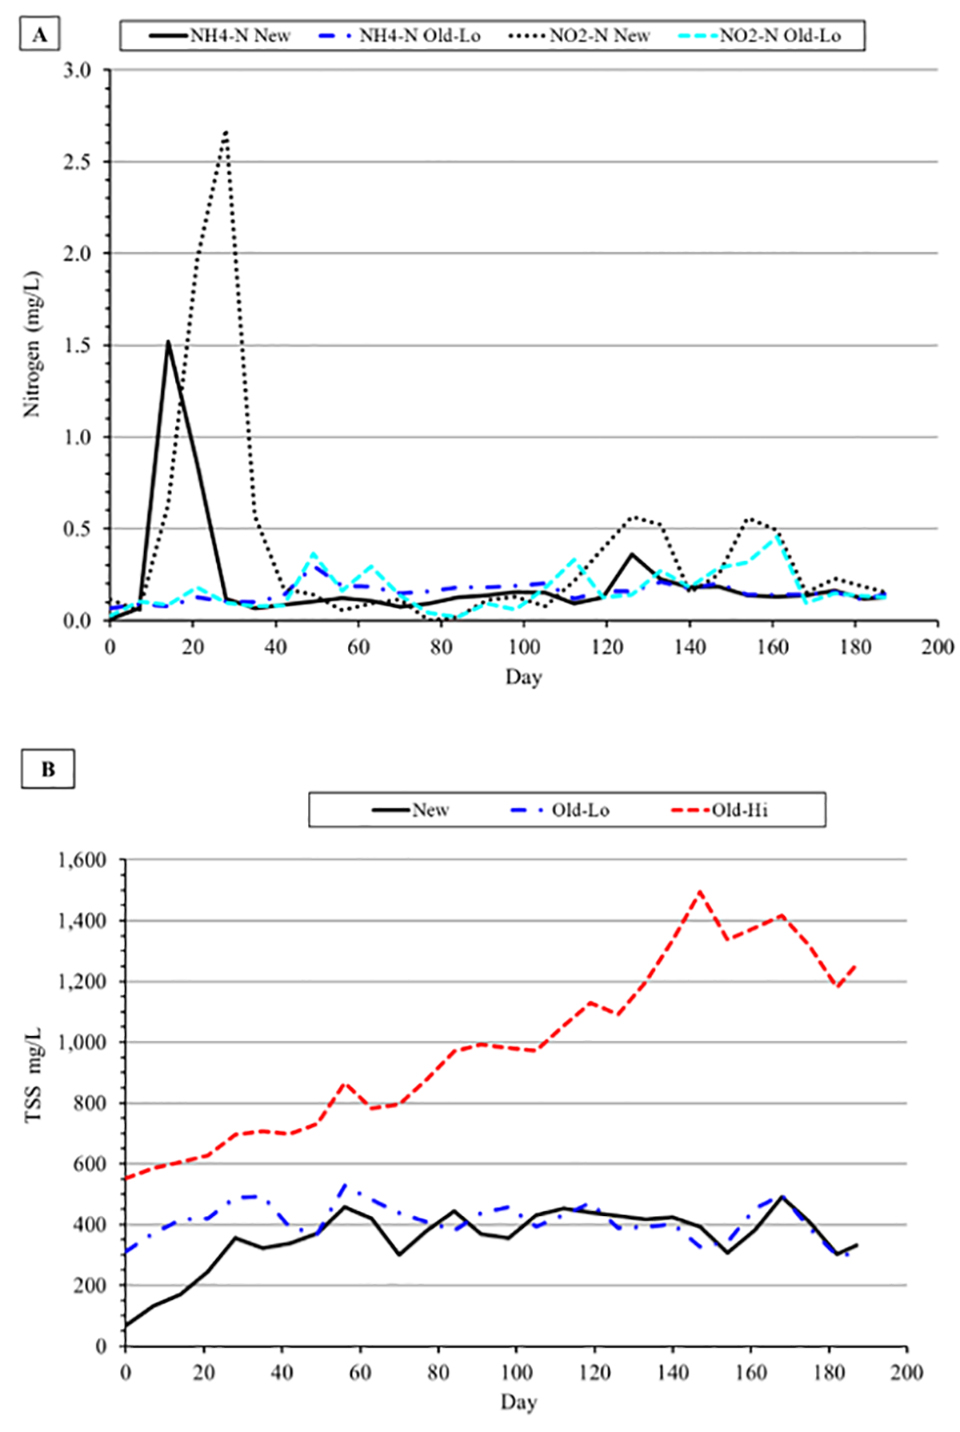 Fig. 1: Mean total ammonia-nitrogen and nitrite-nitrogen concentrations (A) over time in the New and Old-Lo treatments. For clarity, the Old-Hi data was excluded because it overlapped Old-Lo data. Mean total suspended solids (TSS) concentrations (B) over time in the New, Old-Lo, and Old-Hi treatments. N = 3 replicate tanks.